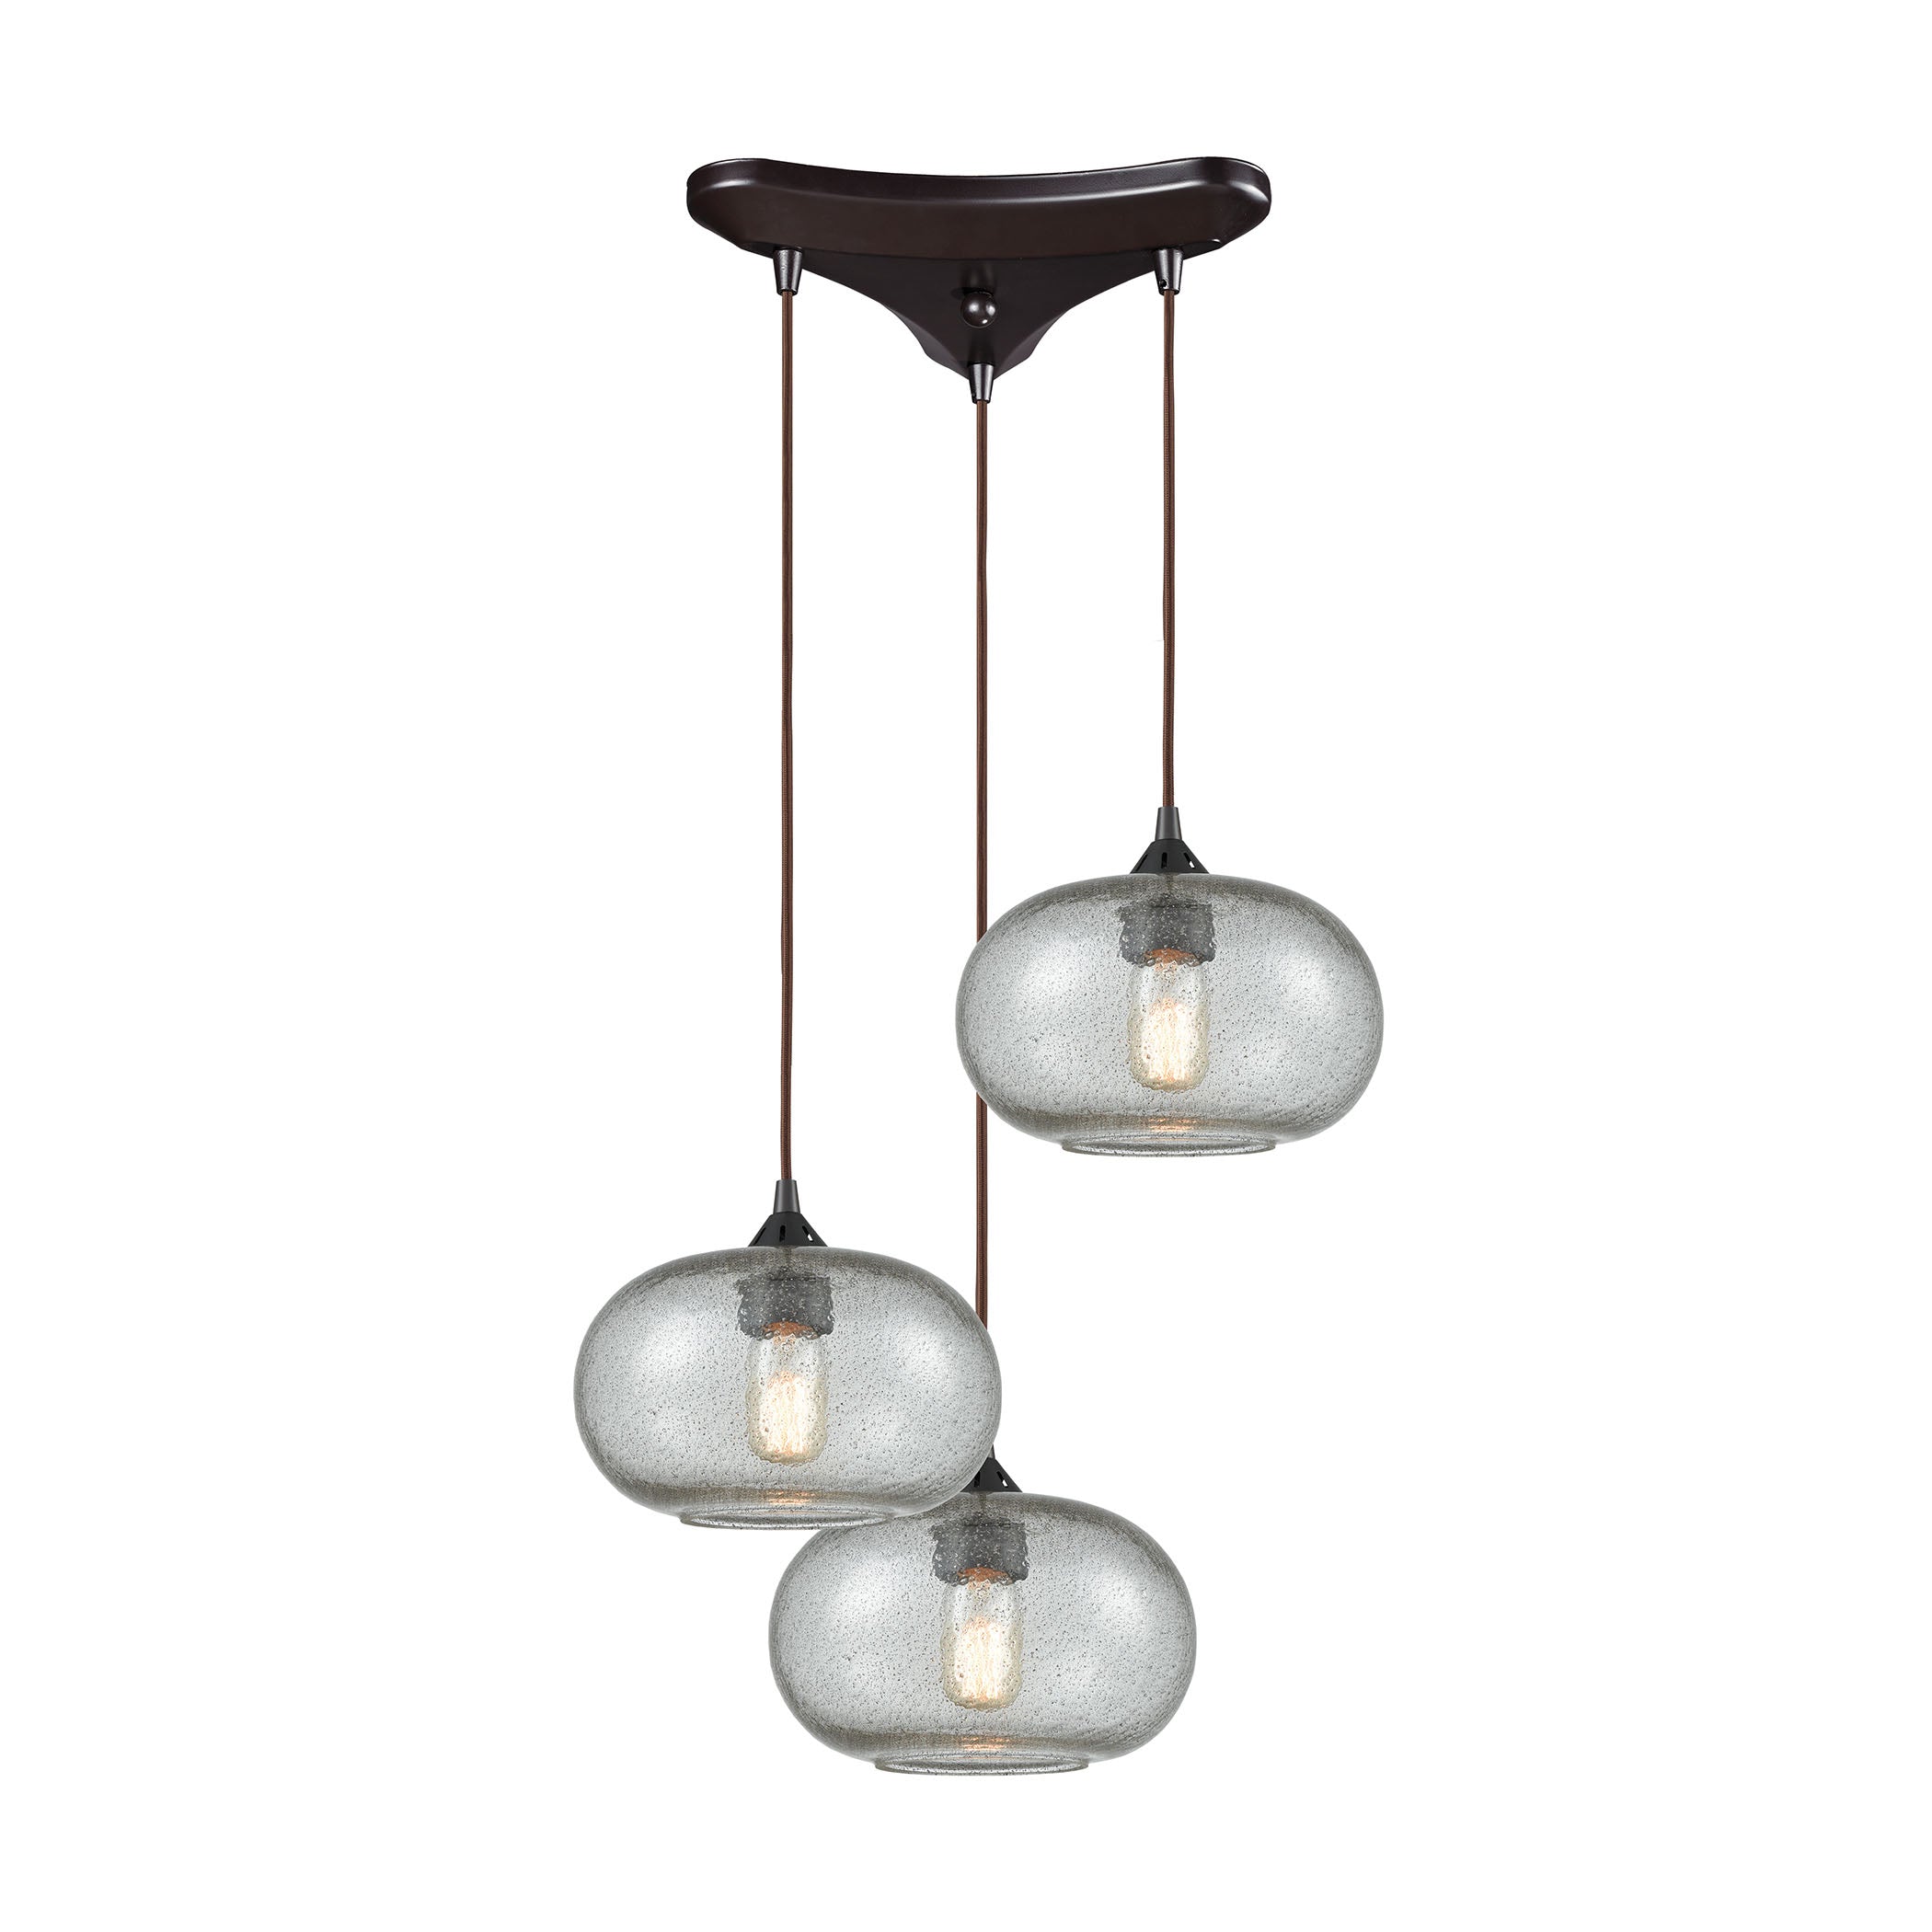 ELK Lighting 25124/3 Volace 3-Light Triangular Pendant Fixture in Oiled Bronze with Rotunde Gray Speckled Blown Glass